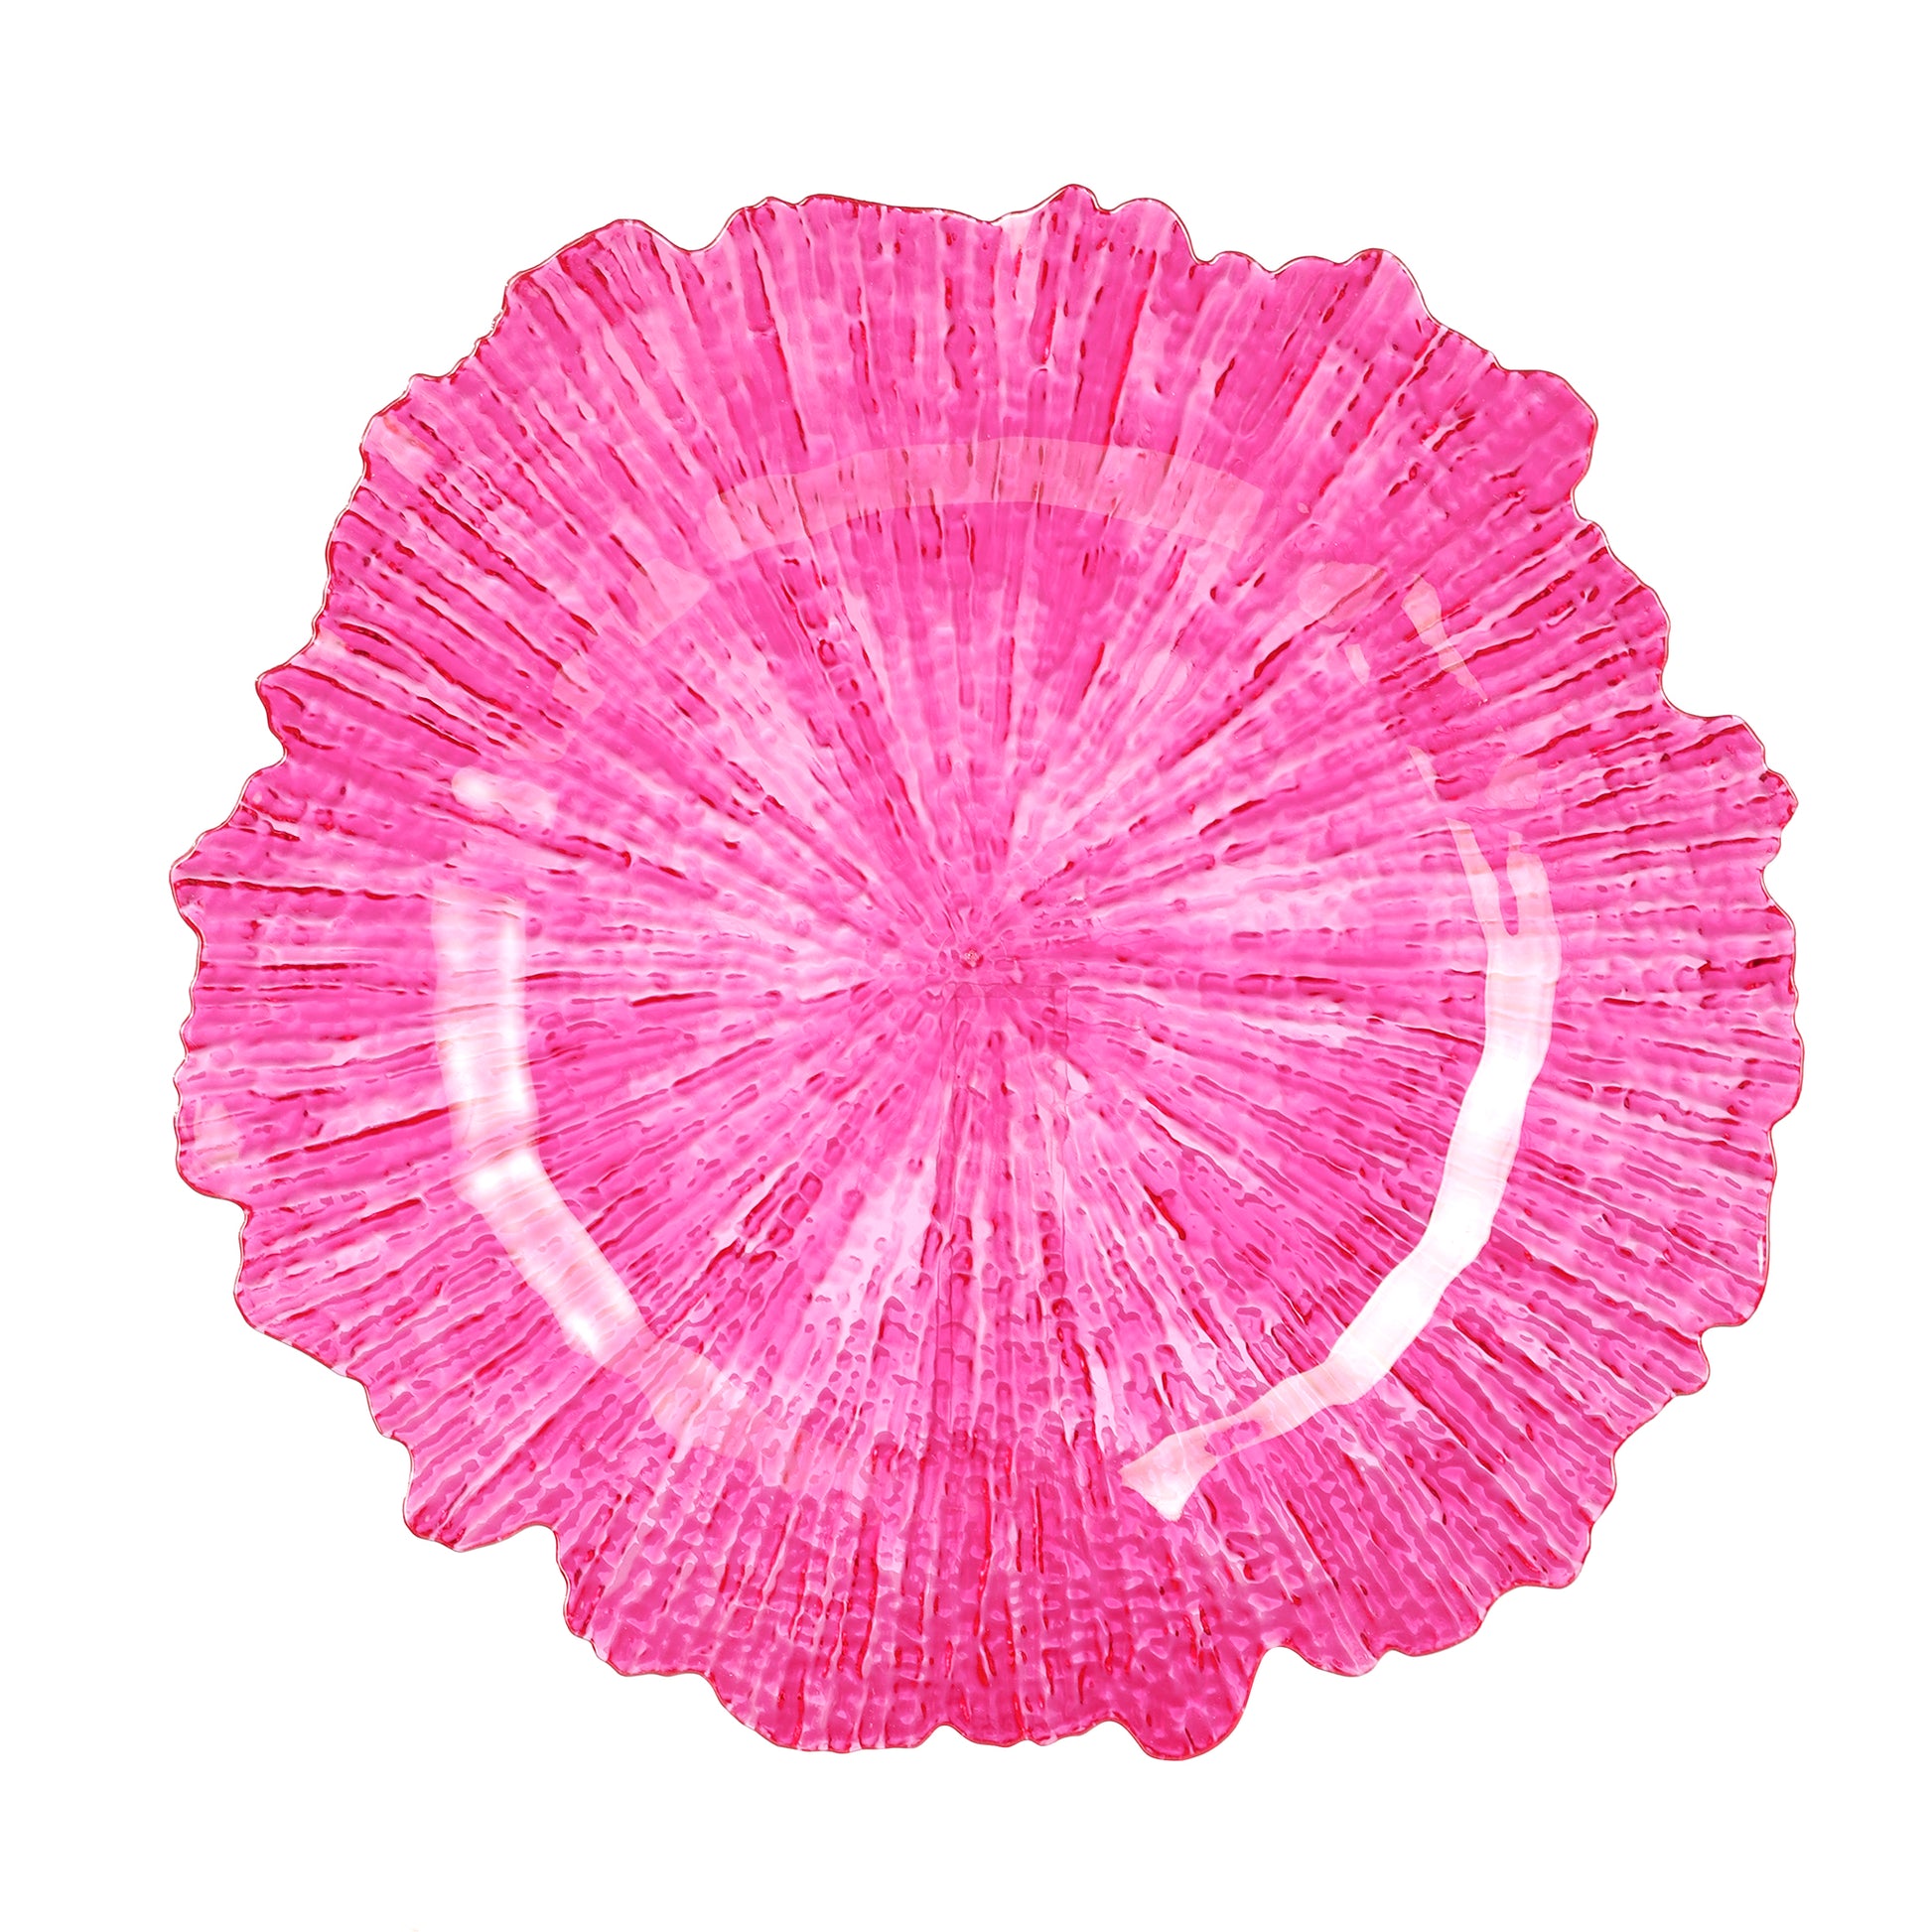 Transparent Reef Plastic Charger Plate - Fuchsia